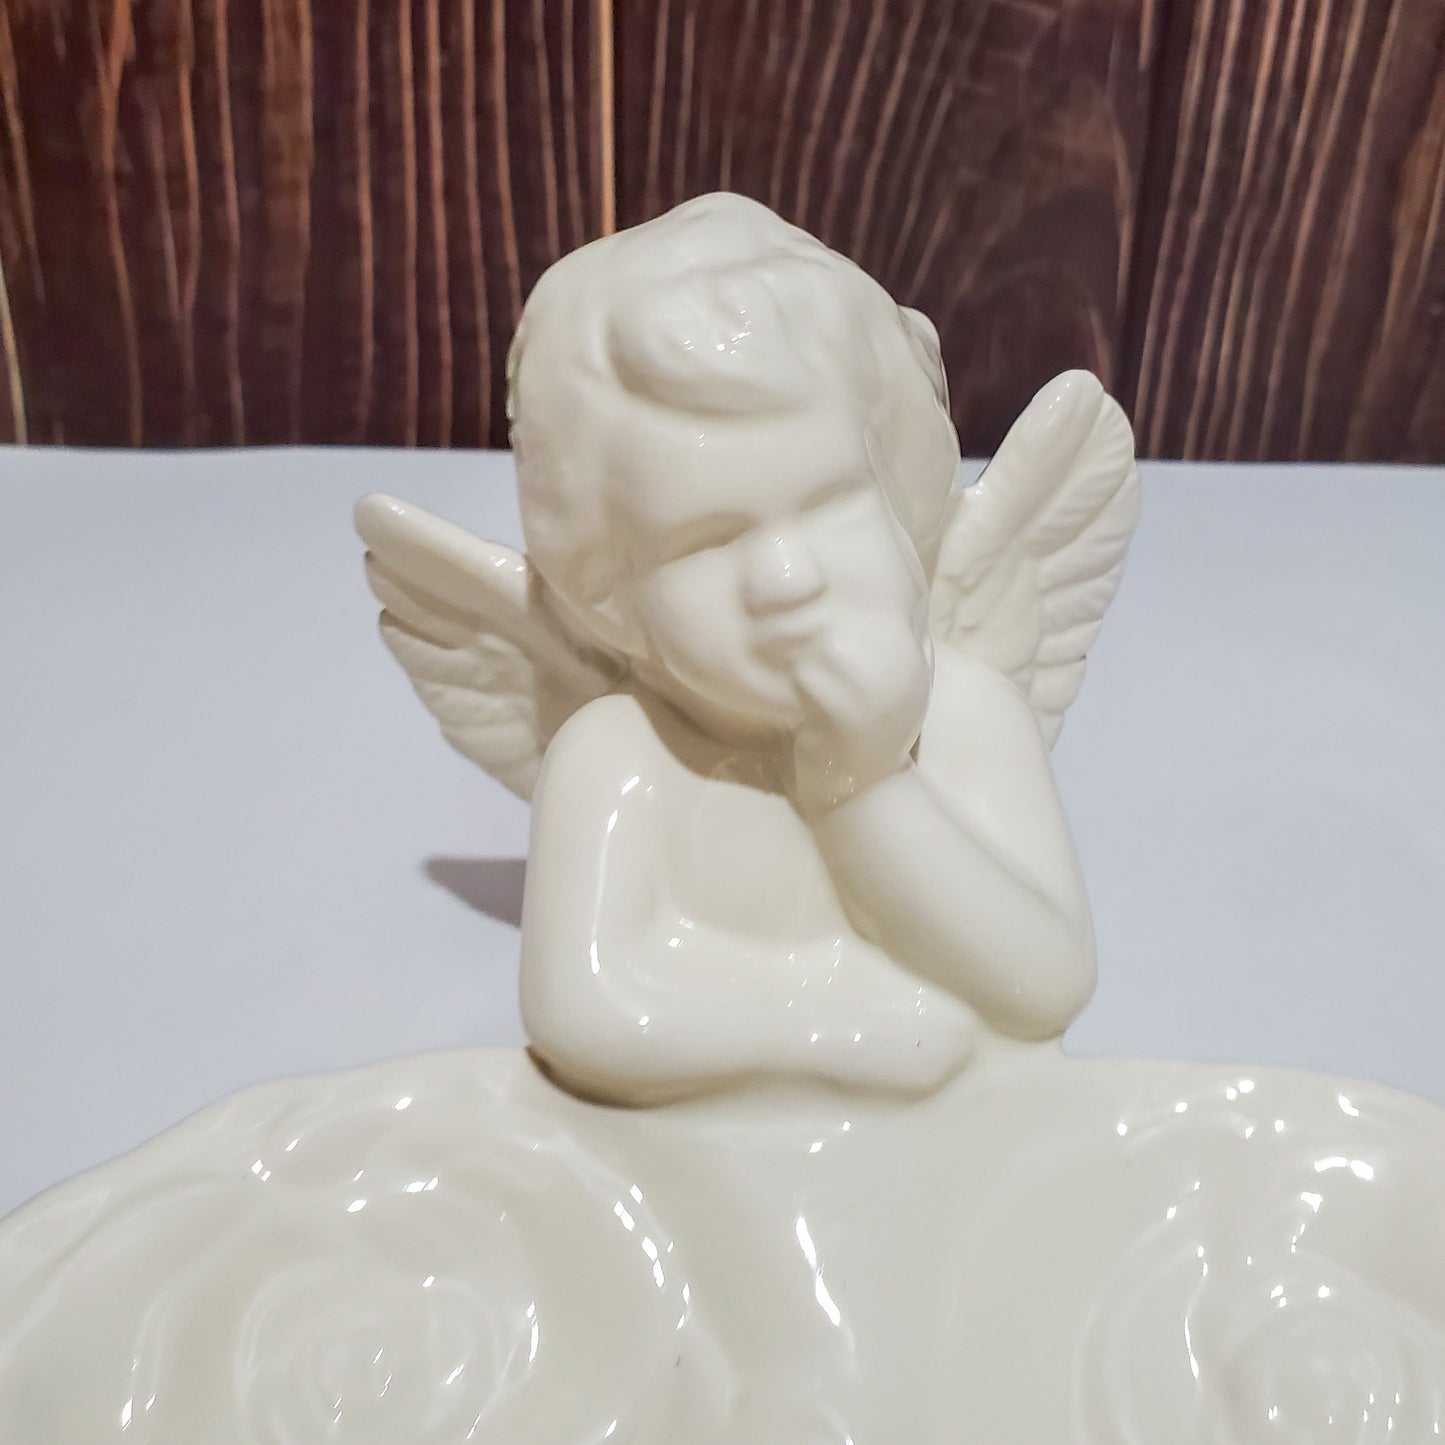 Cherub Angel Heart Shaped Candy or Soap Dish - Vintage New by World Bazaars Inc